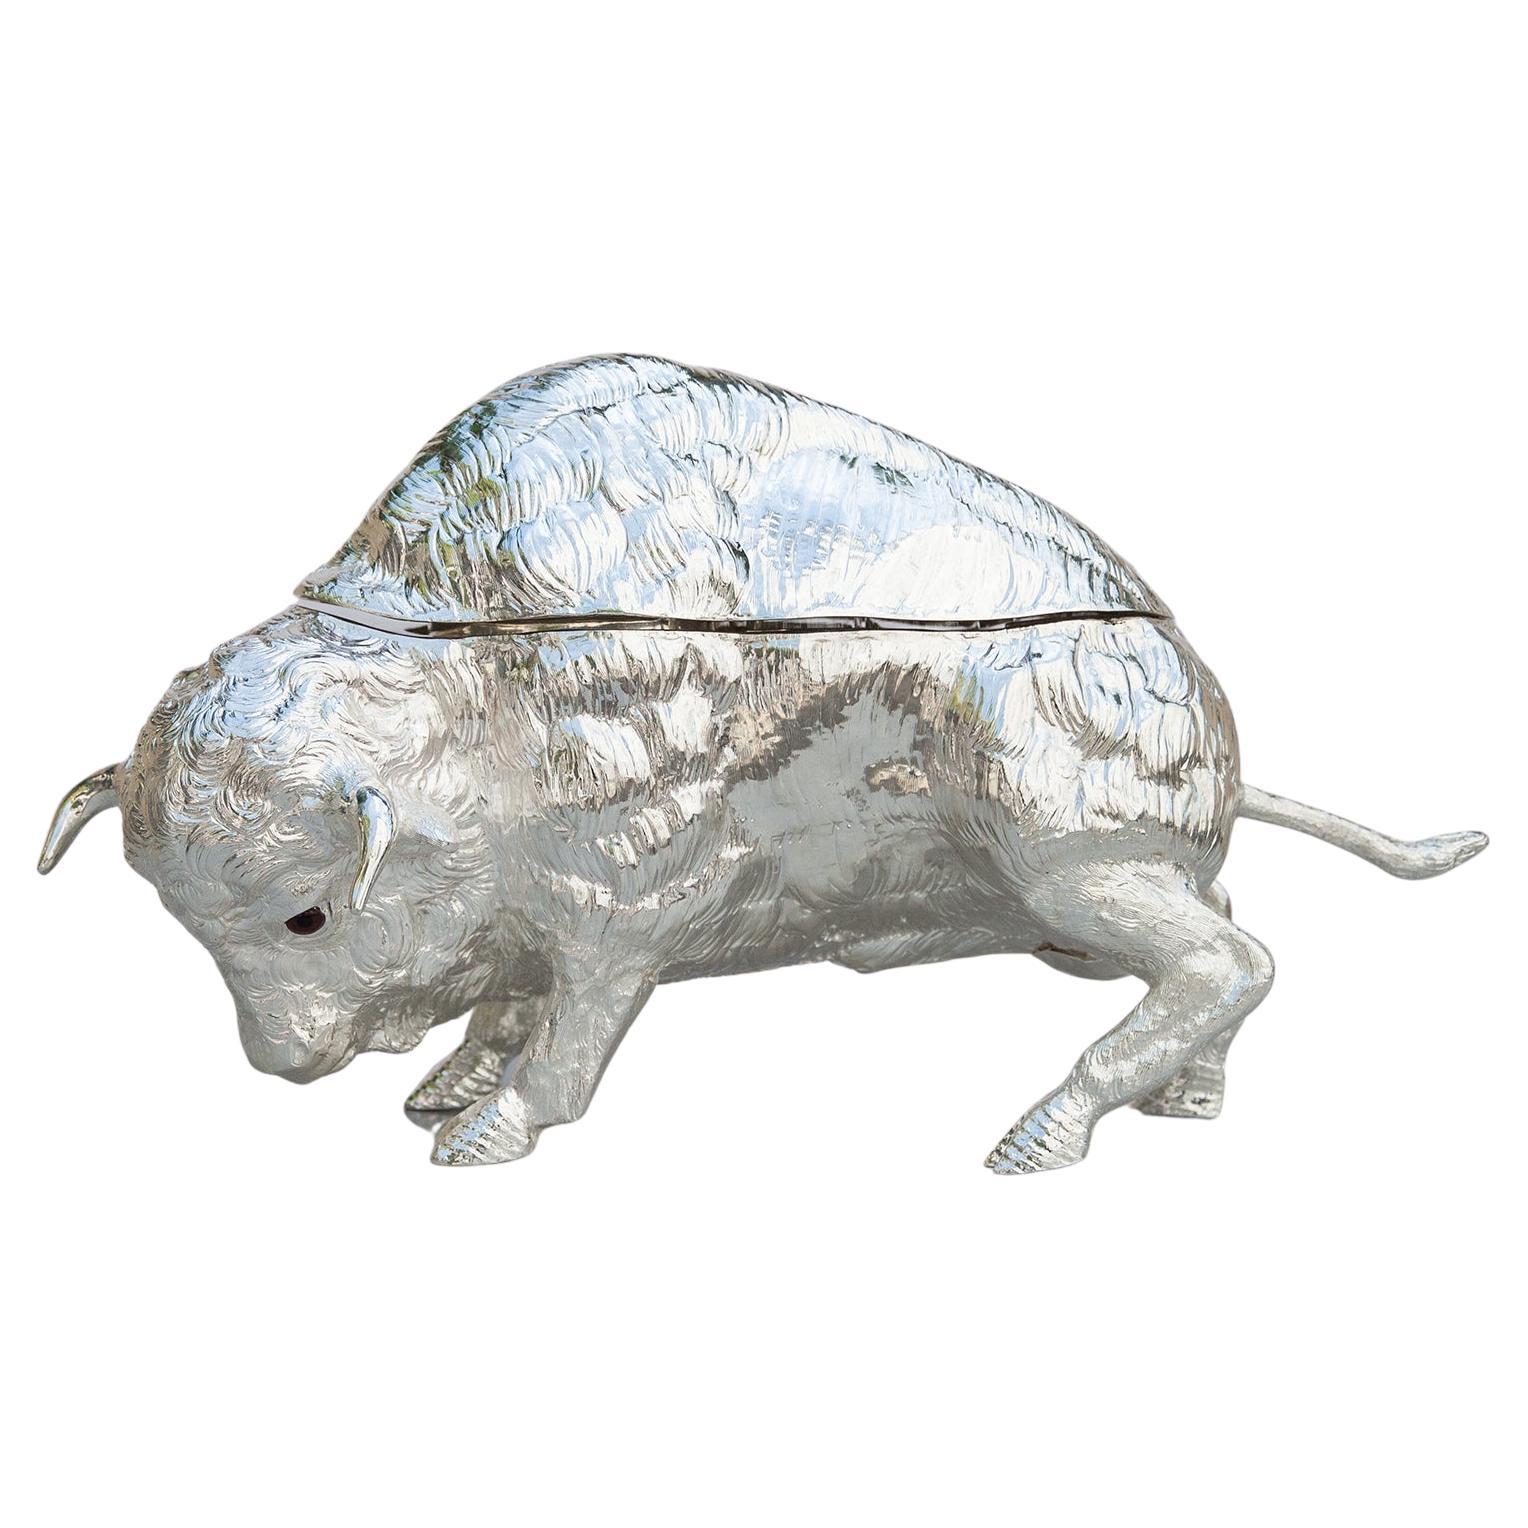 Franco Lapini exquisite vintage bison sculpture liquor set is made entirely of brass plated in silver and its surface is lightly textured to give it an organic feel. Under the top are four glasses and a little carafe. Either alone or combined with